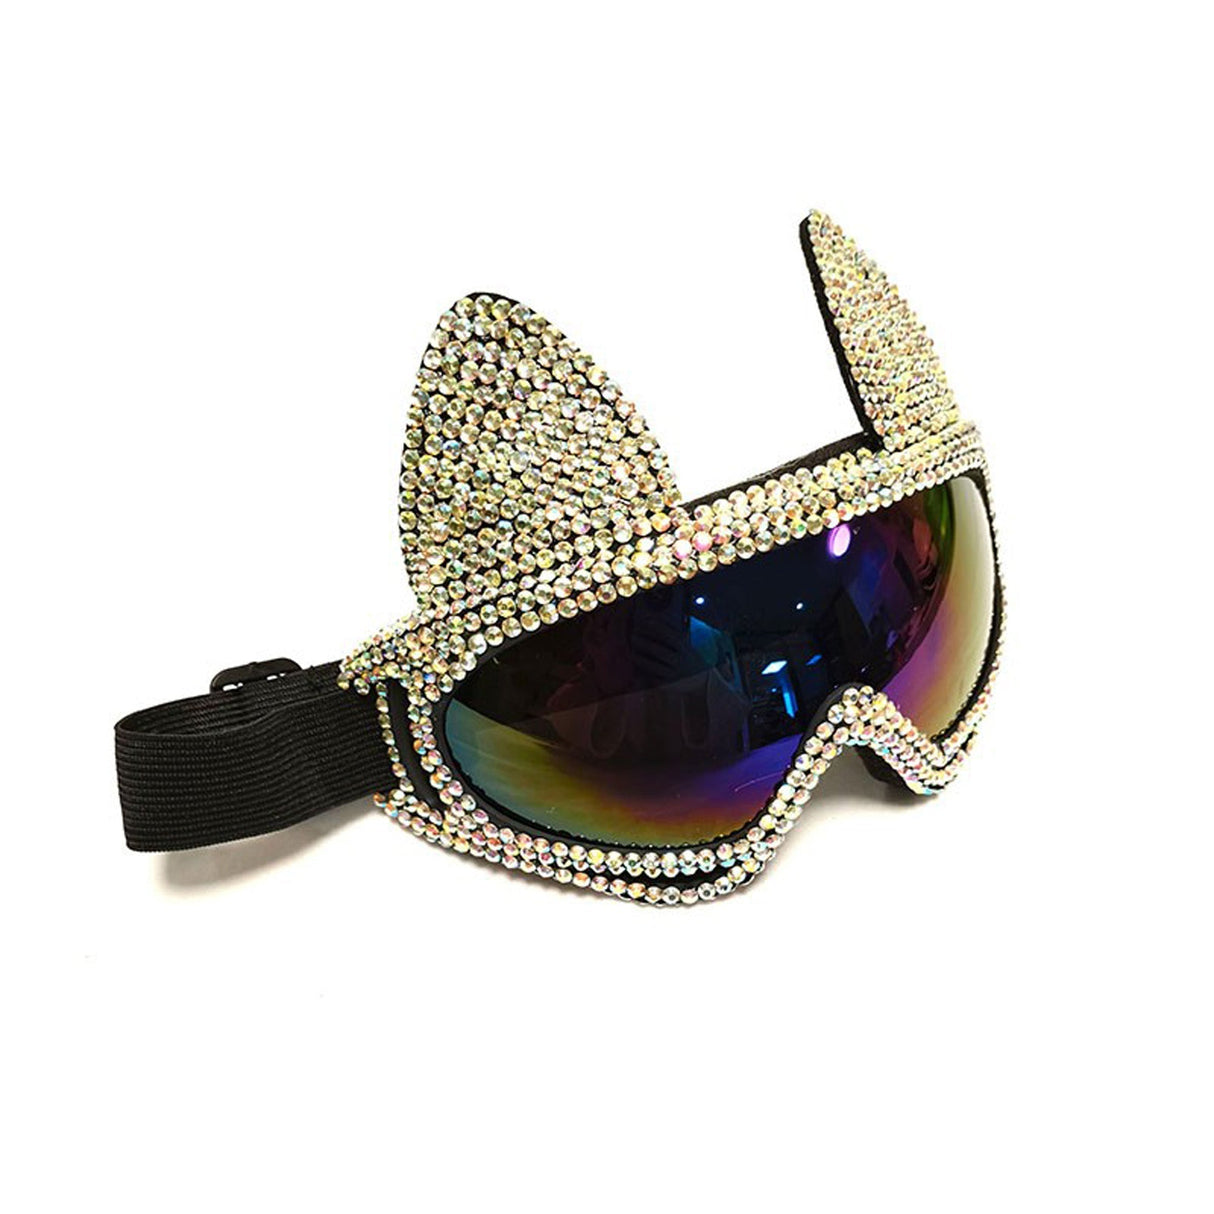 KBW GLOBAL CORP Costume Accessories Cat Style Sunglasses with Gold Diamond 831687042867